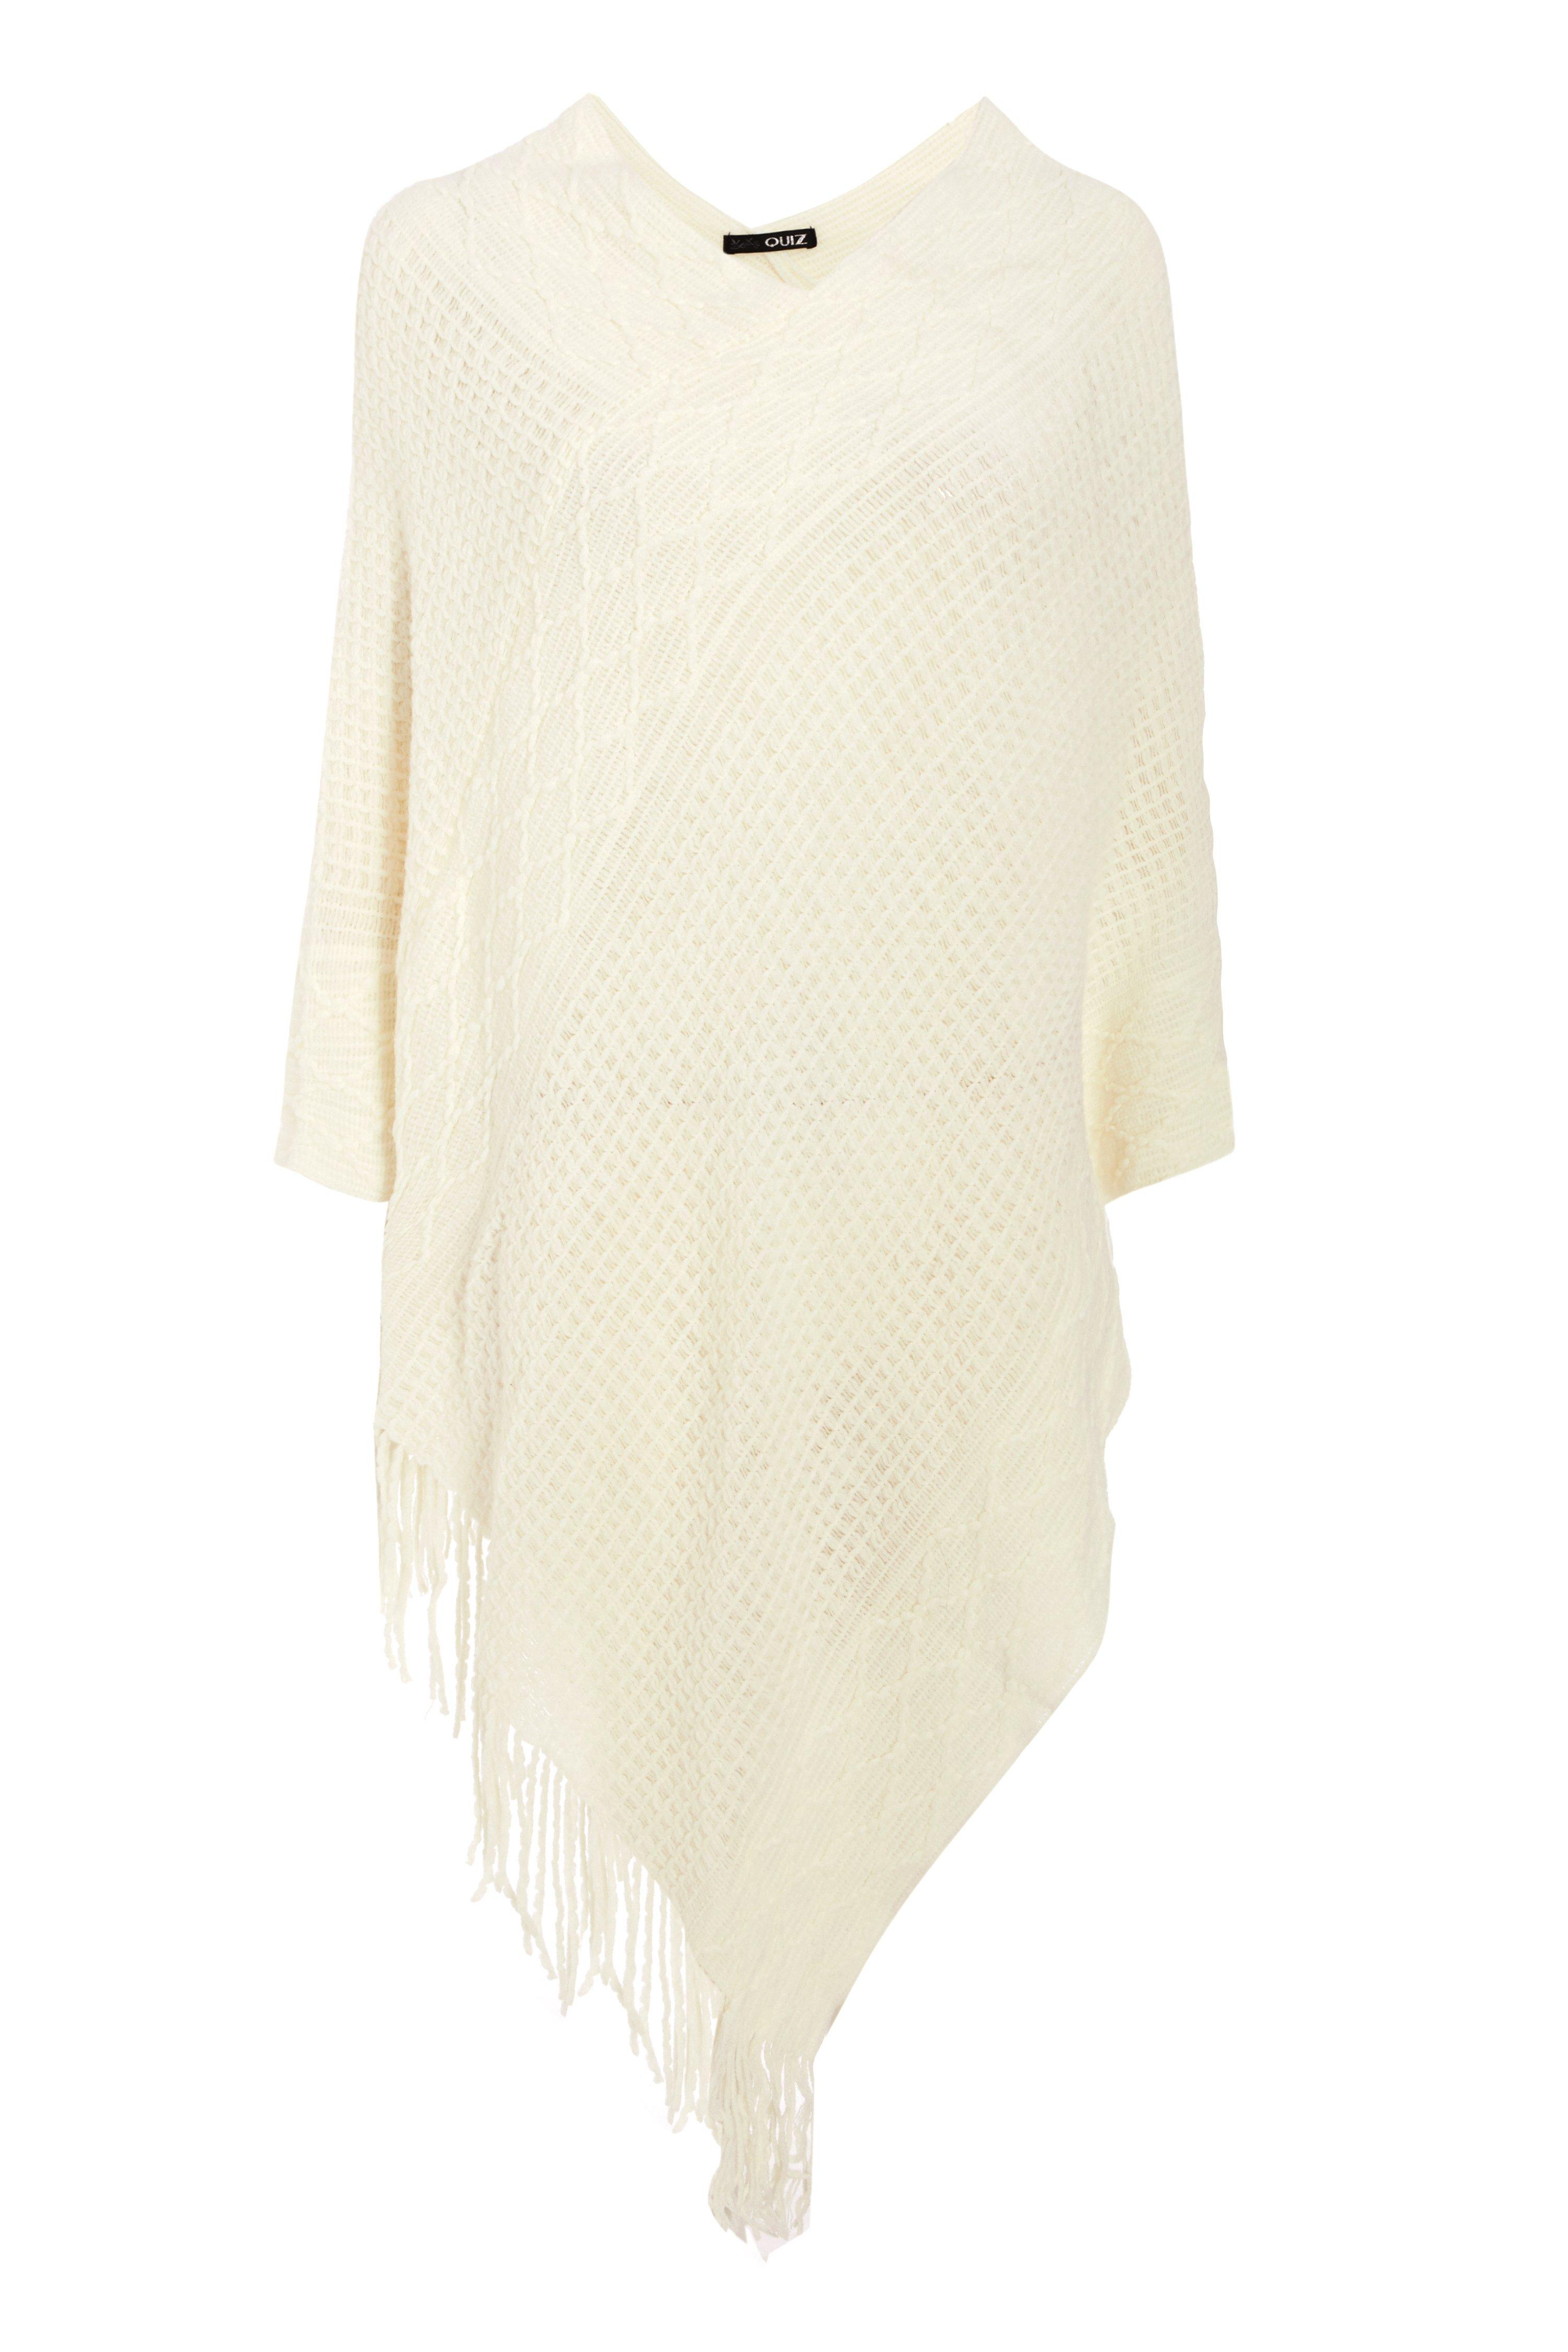 Cream Knitted Poncho - Quiz Clothing